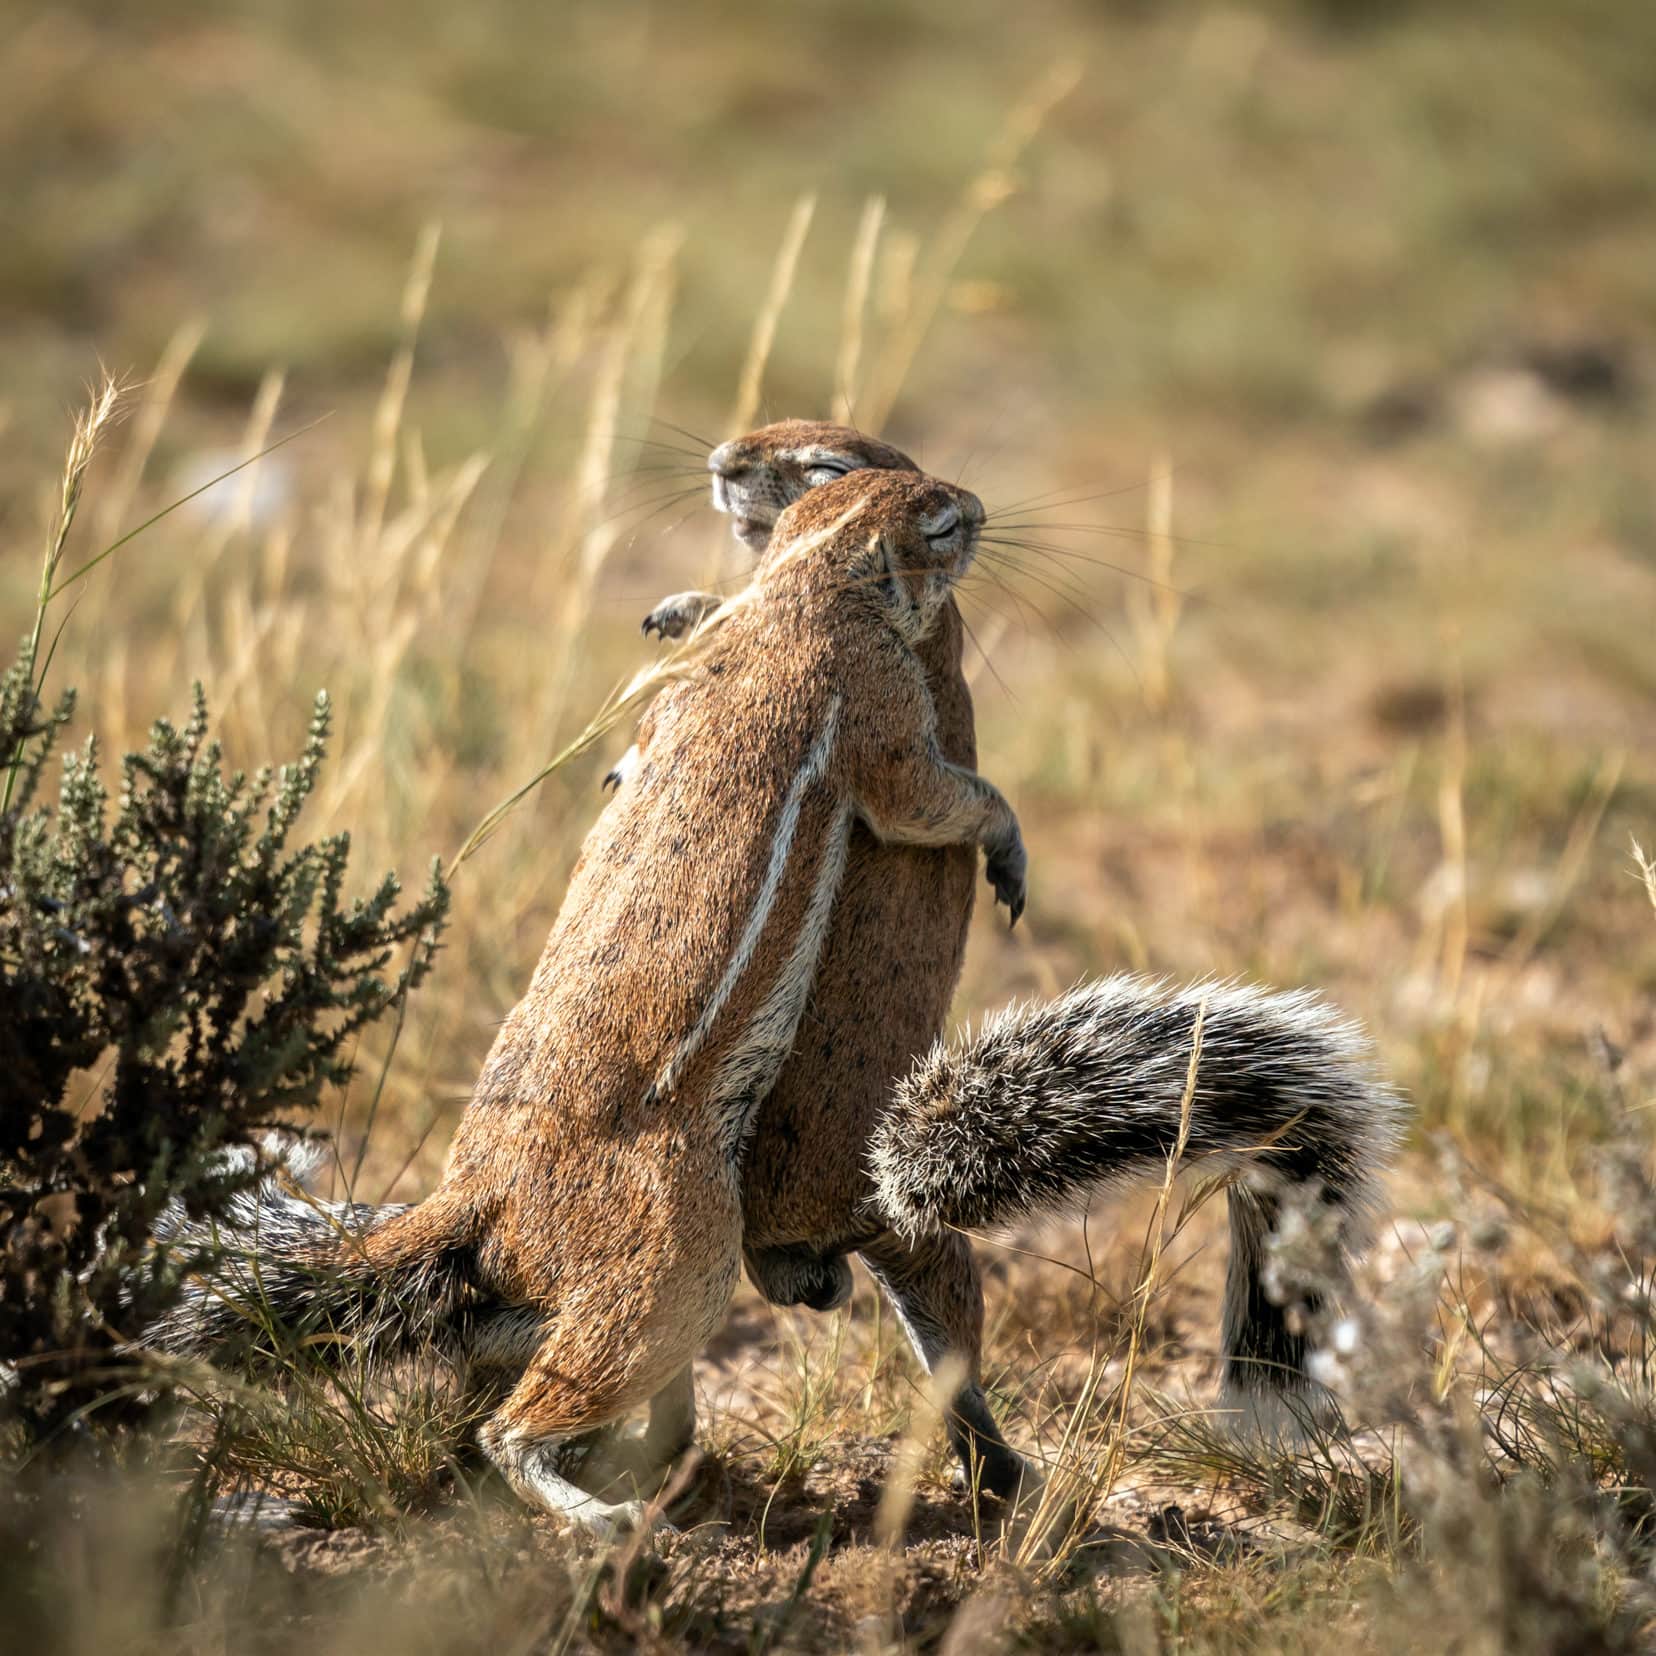 two ground squirrels embracing stood up